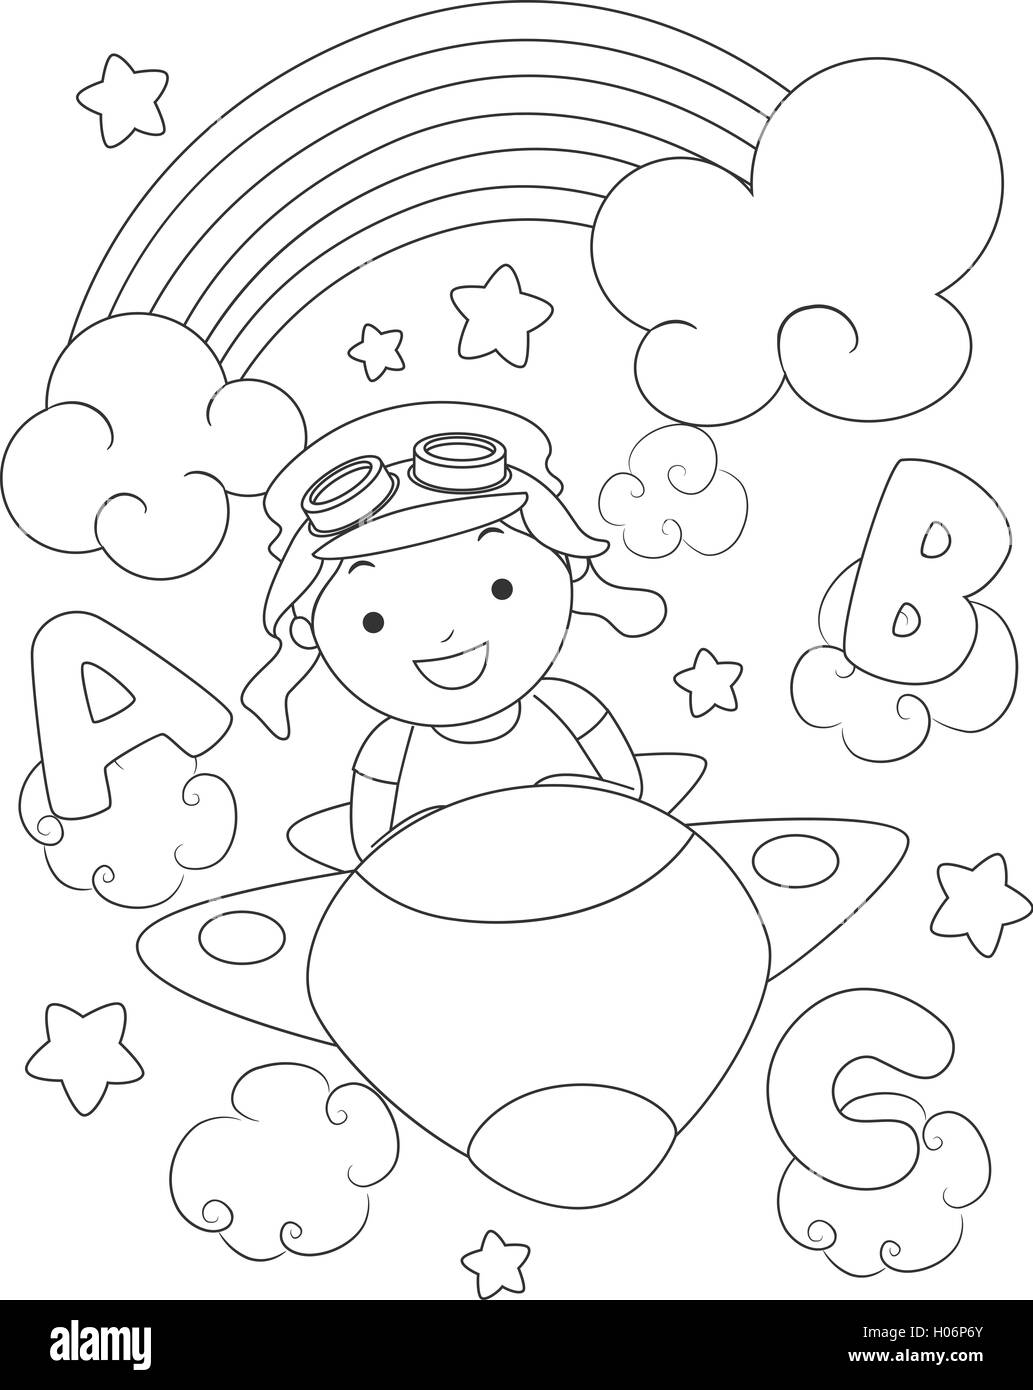 Black and White Coloring Page Illustration of a Boy Dressed as an Aviator Stock Photo